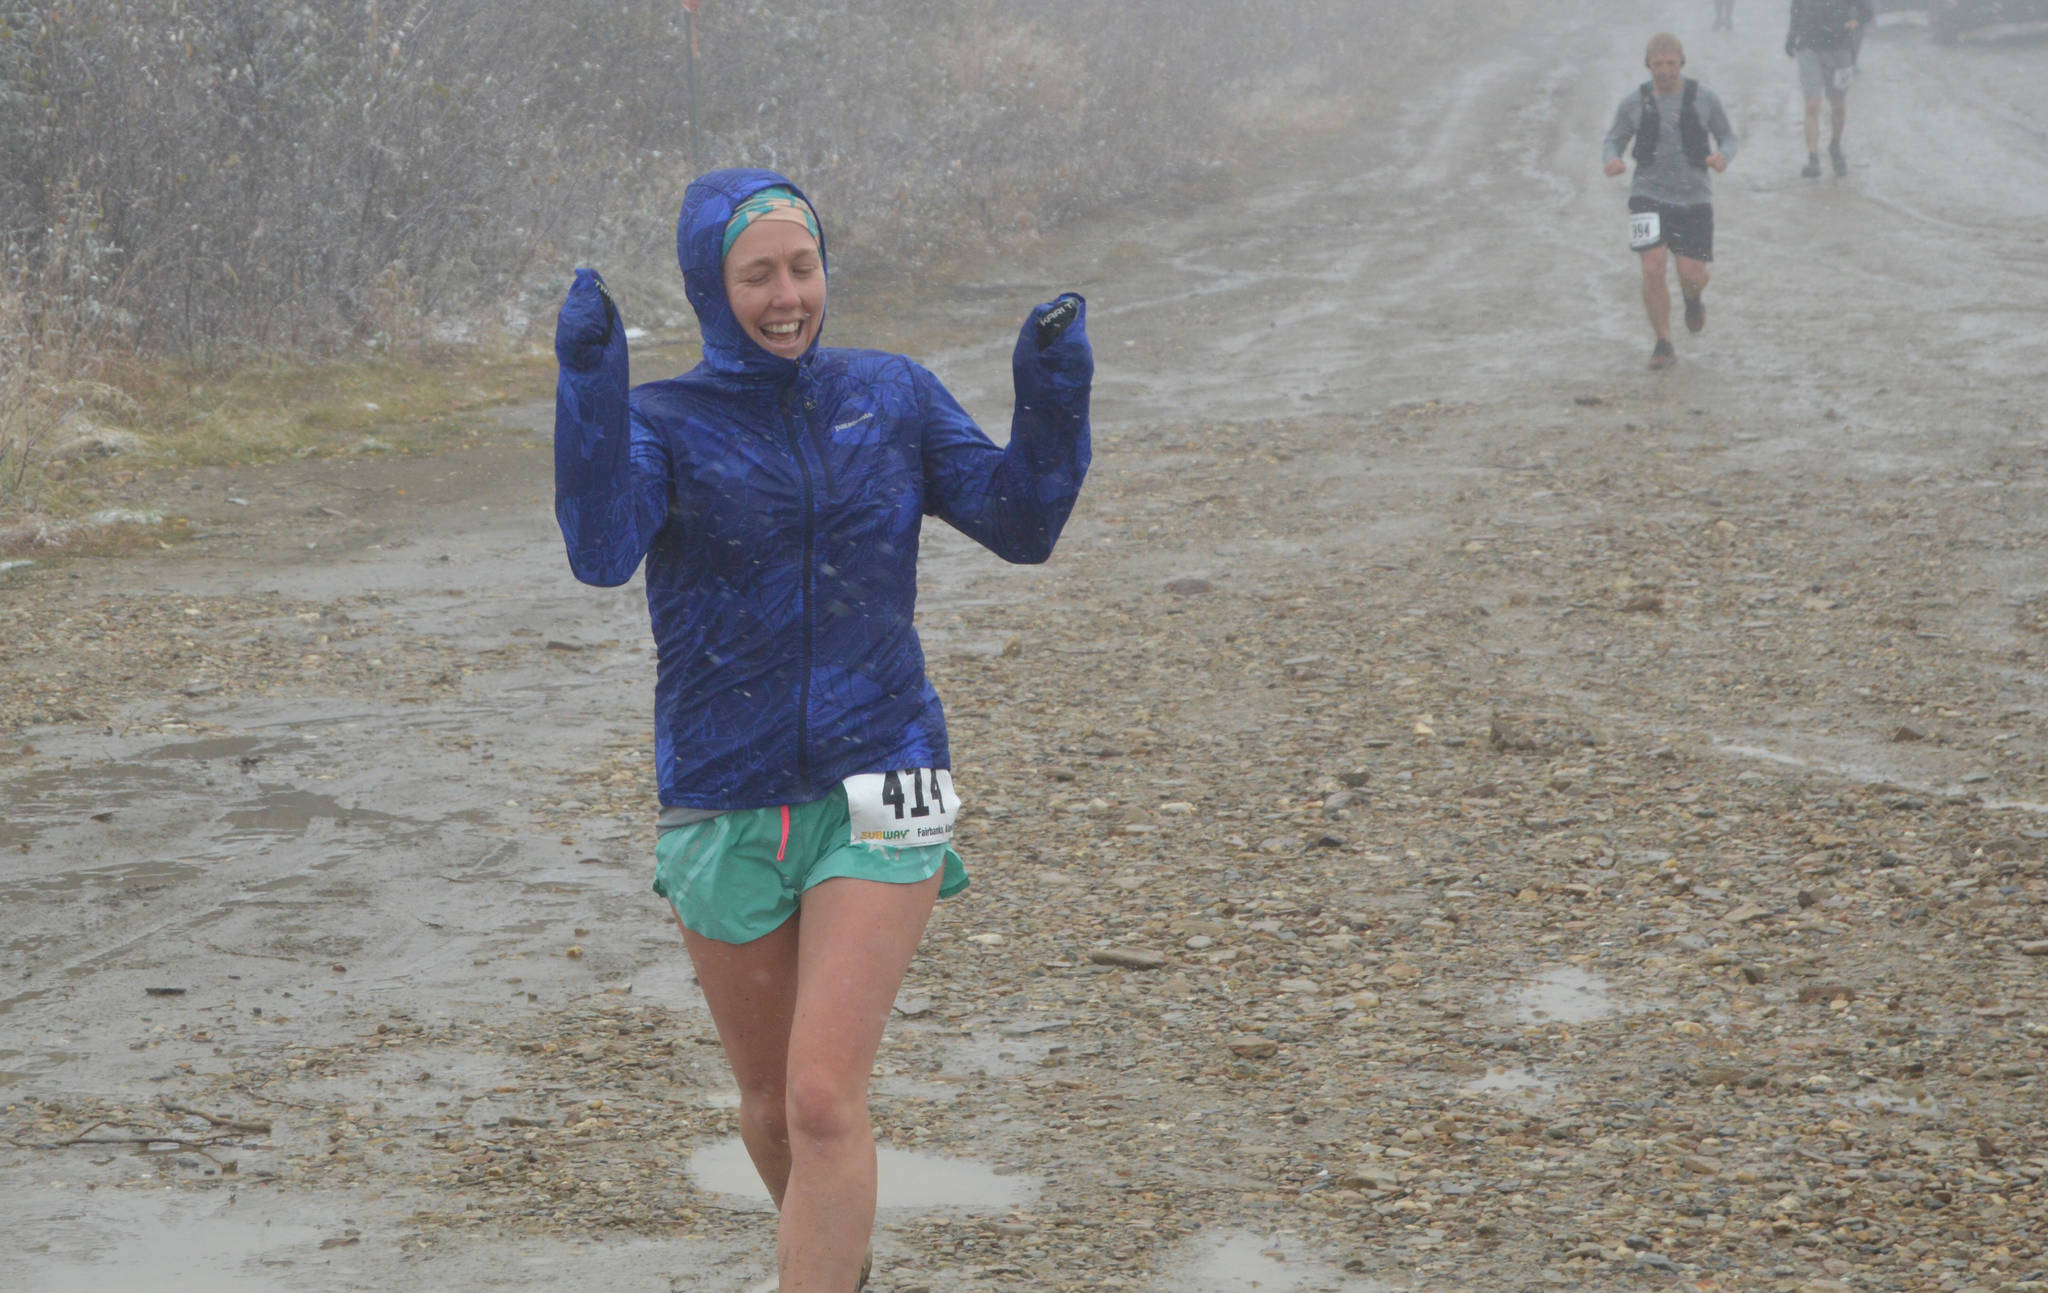 The author ran a marathon in the snow and has been feeling pretty blue since. (Photo courtesy Kat Sorensen)